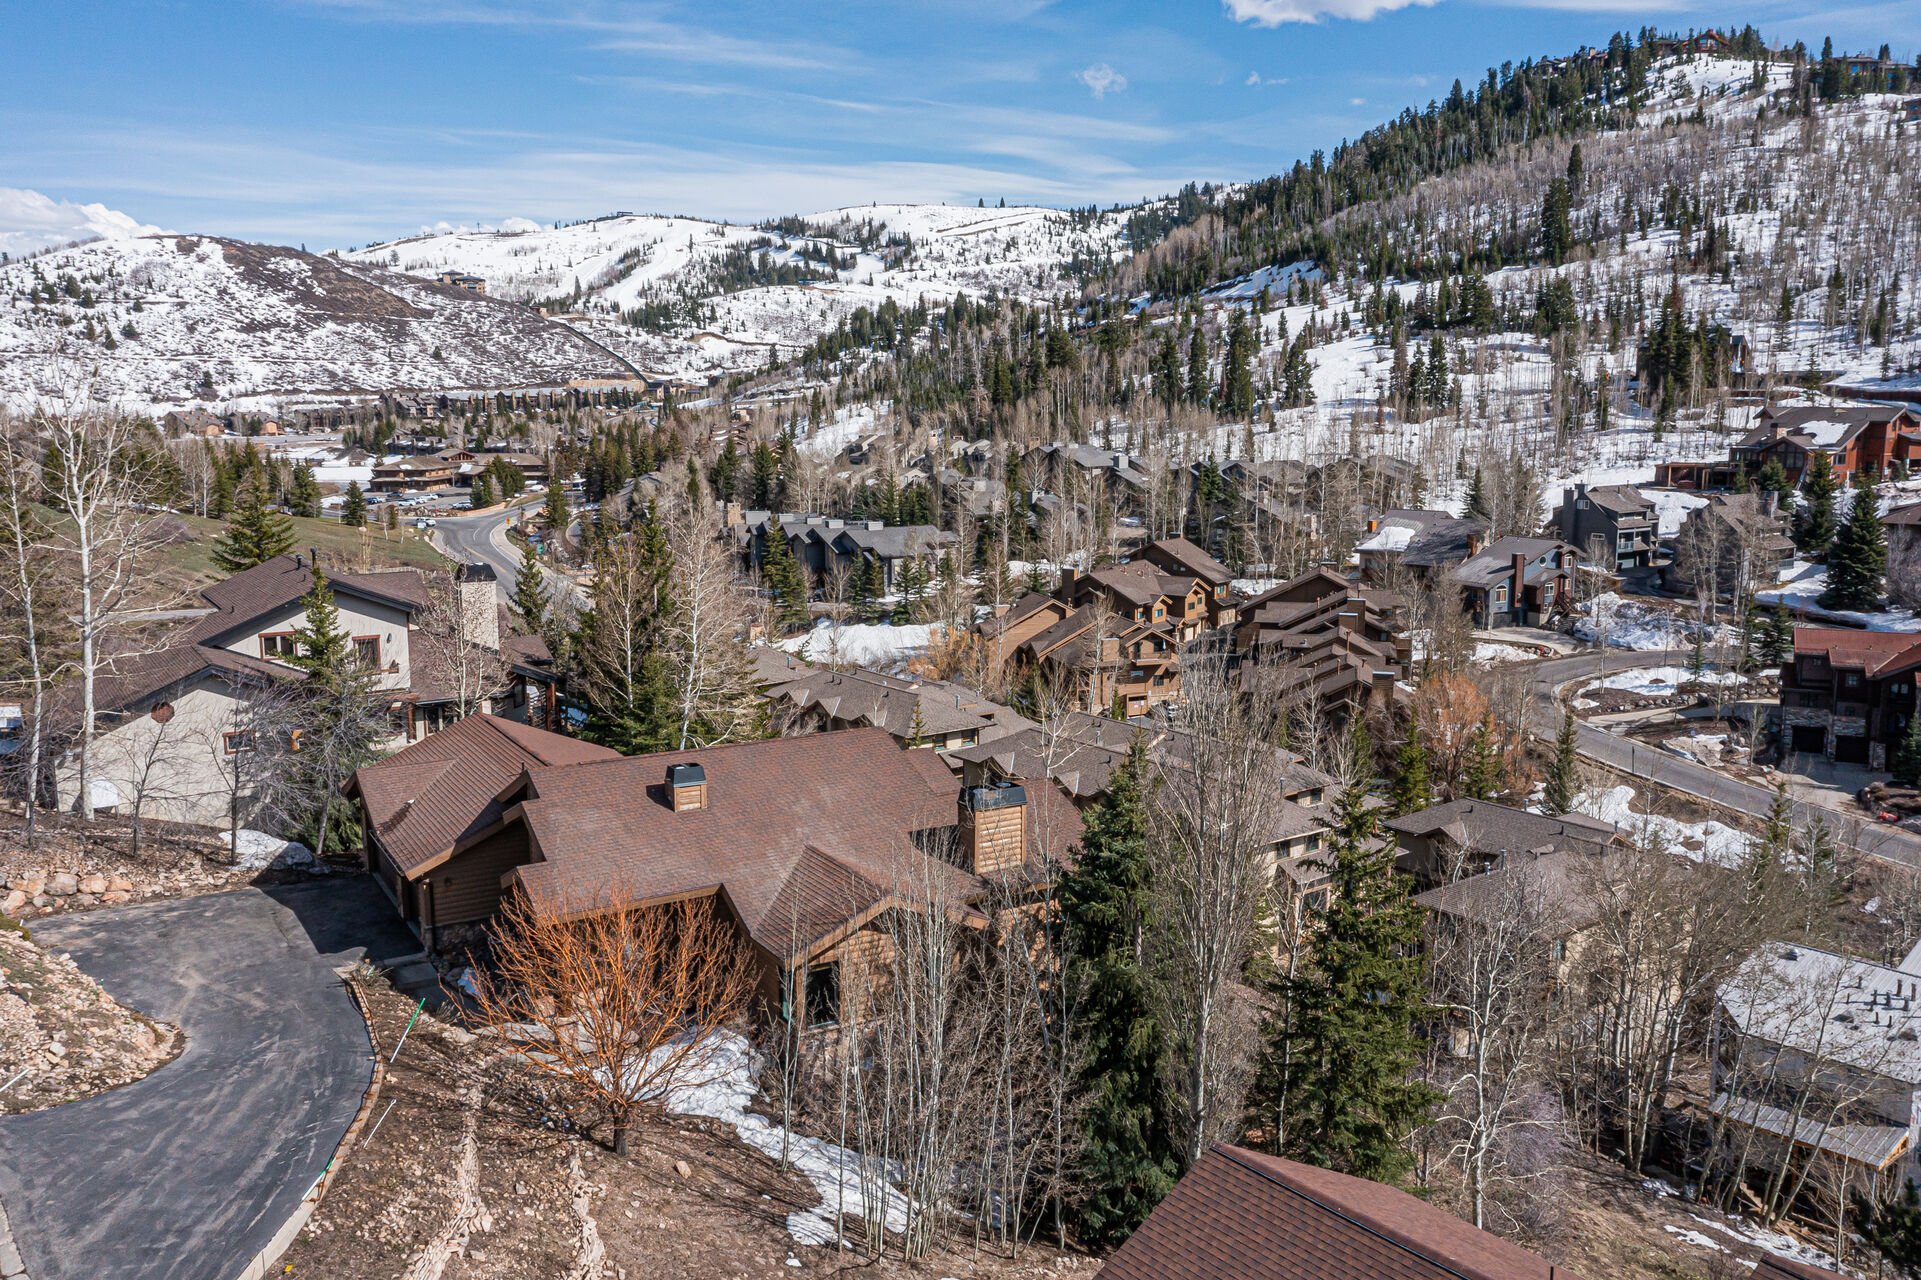 Driveway to Two-Car Garage and Deer Valley Resort Backdrop